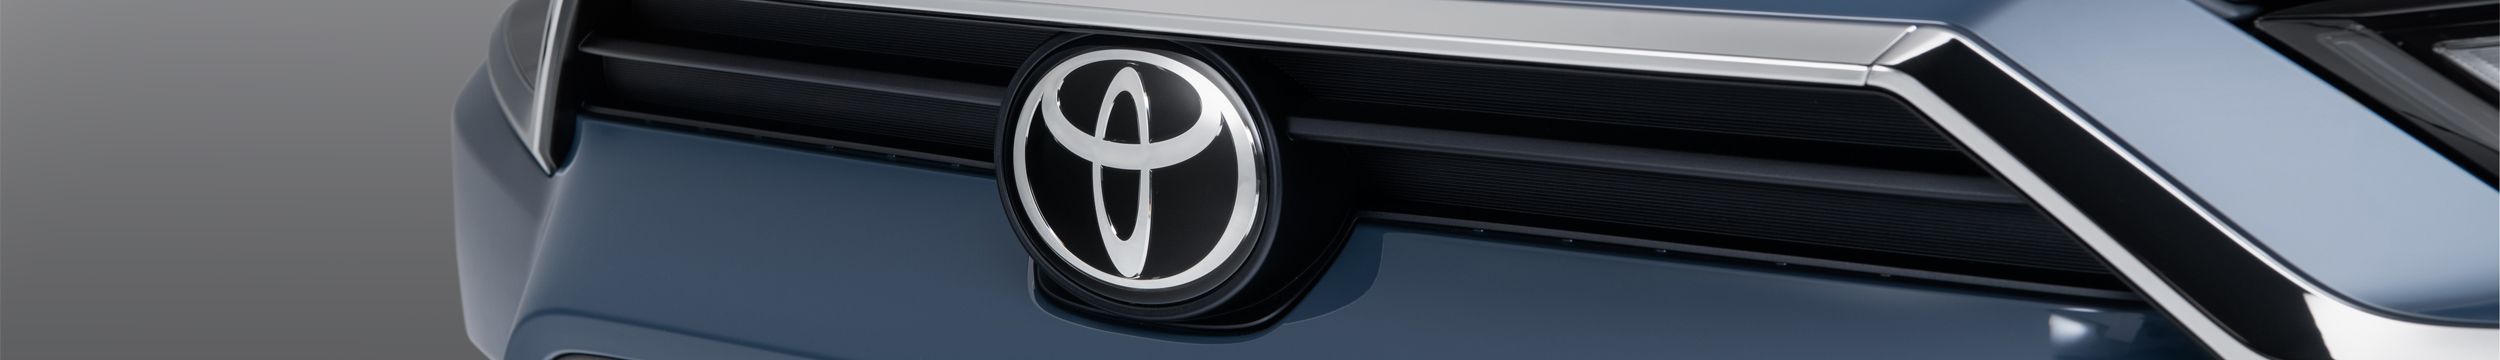 Toyota page header image